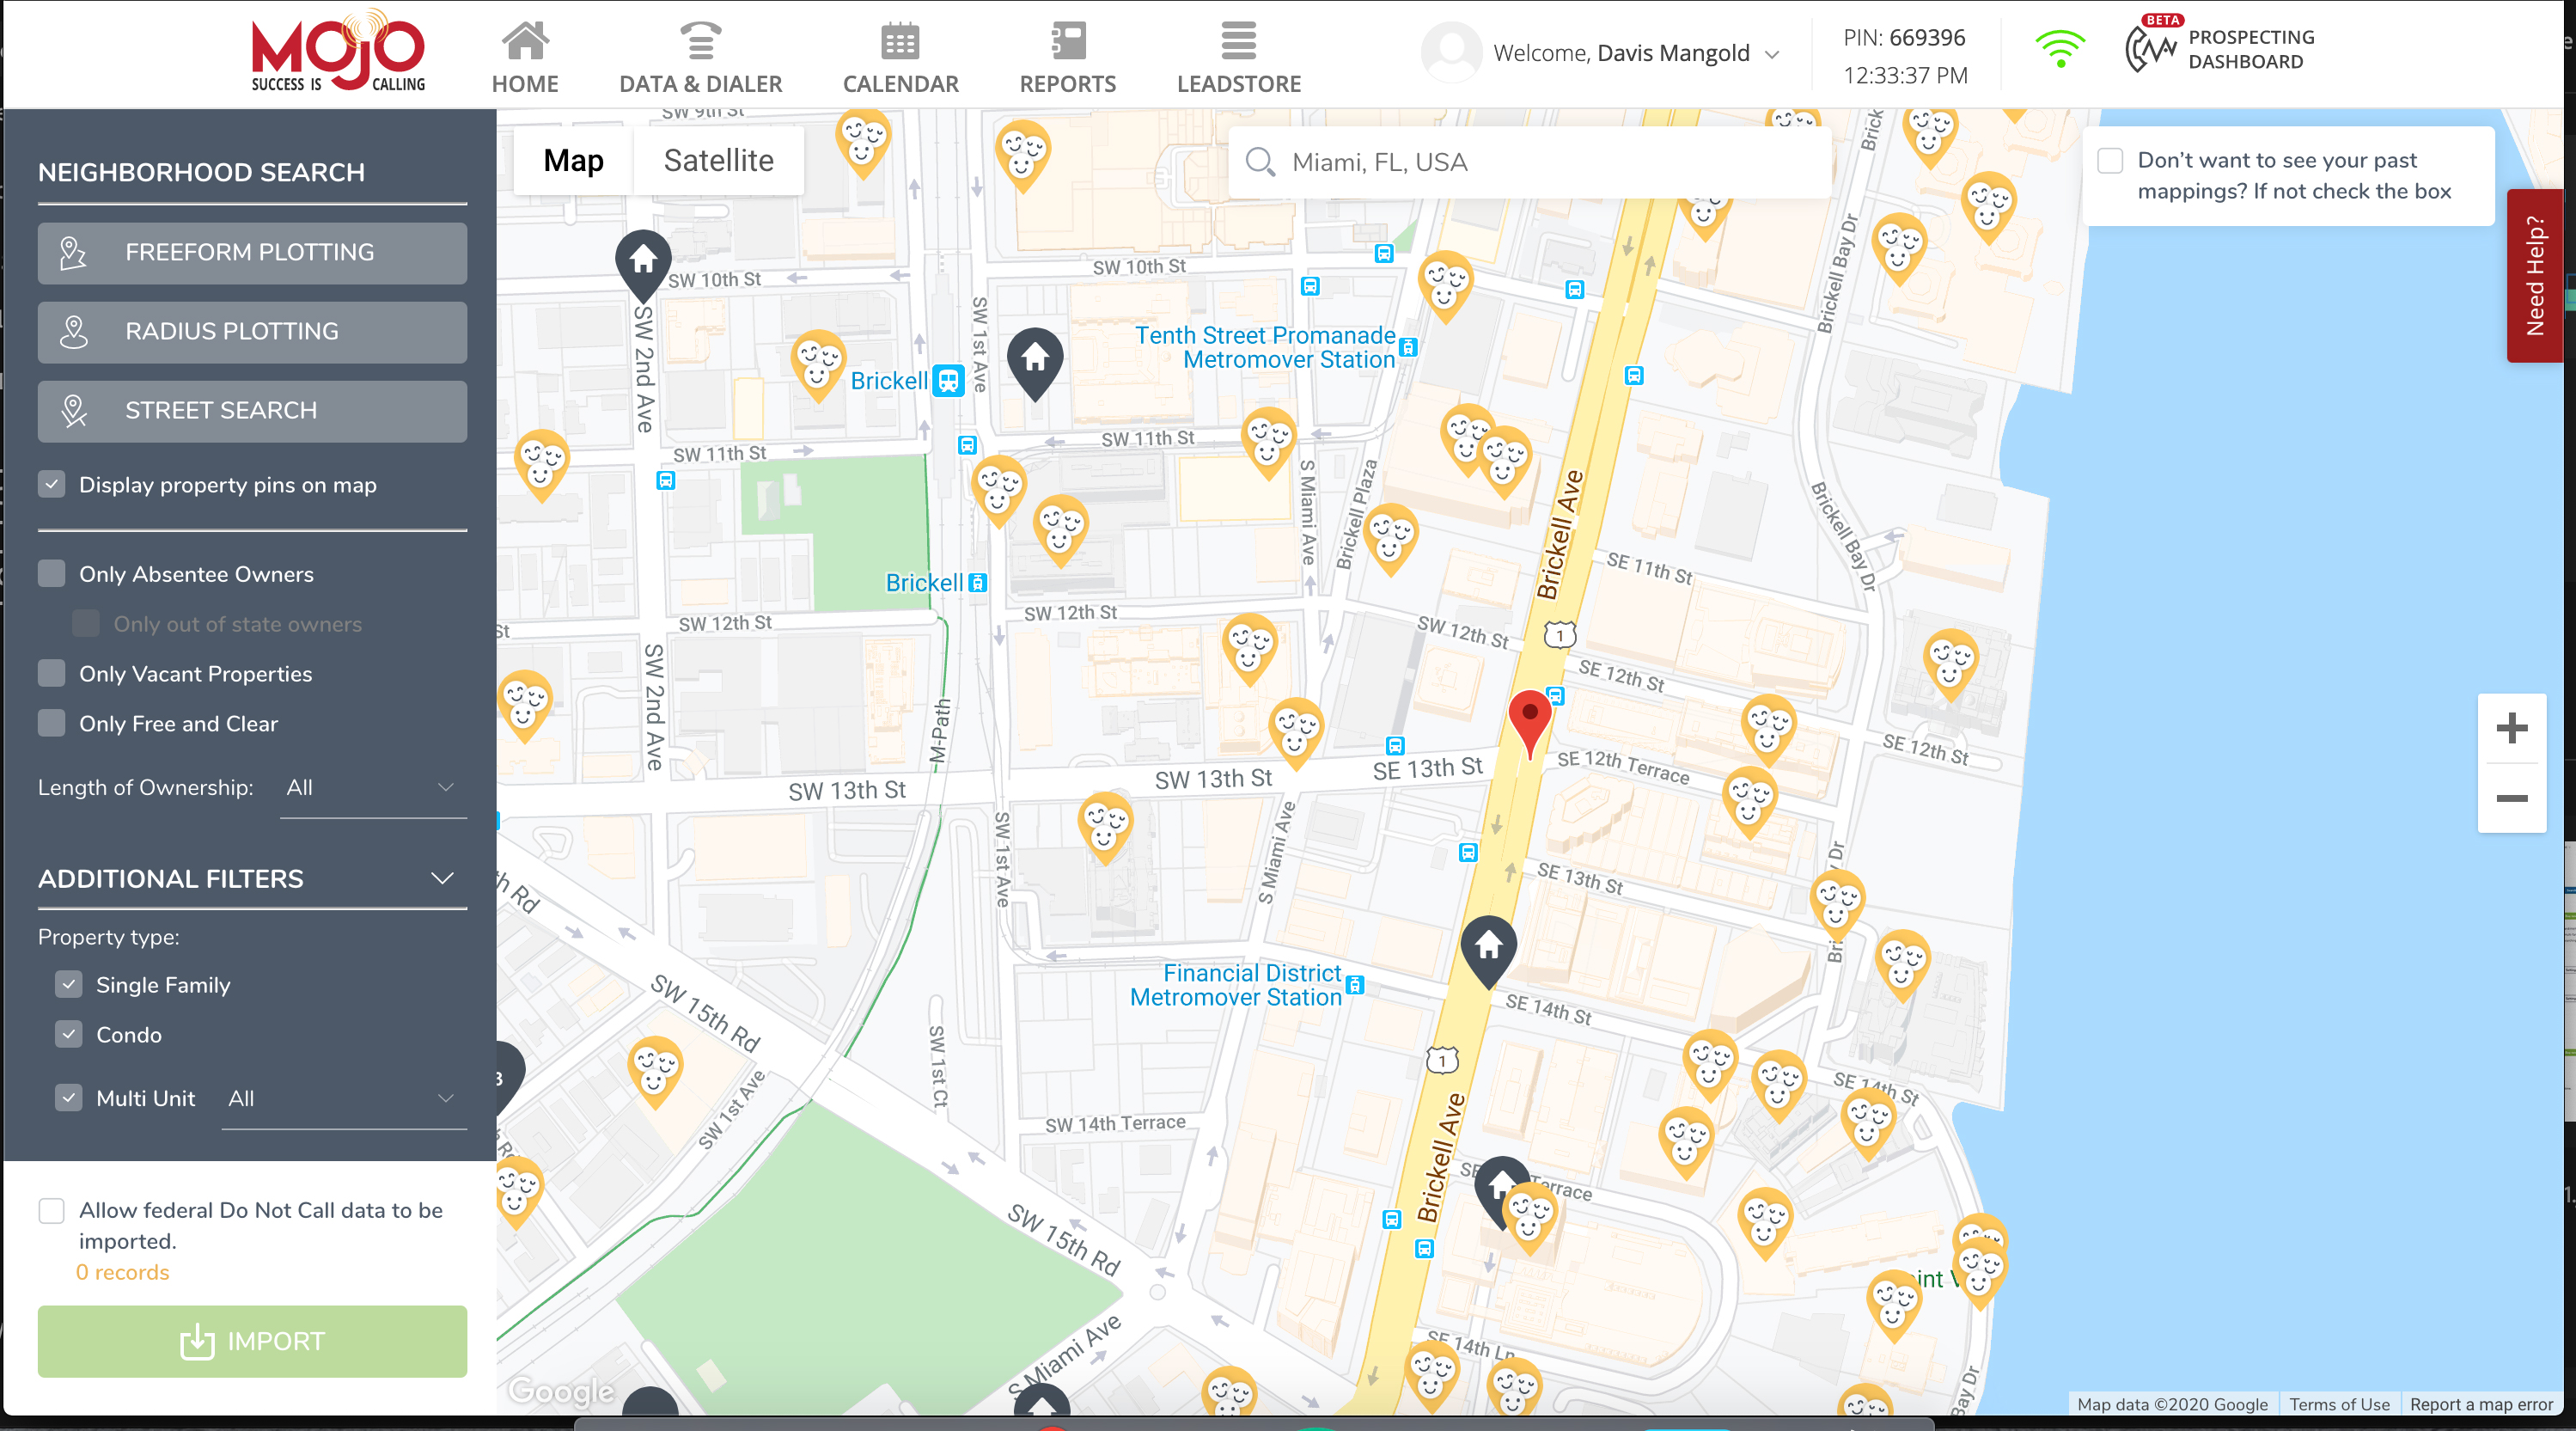 Circle prospecting with Mojo's Neighborhood Search interface.